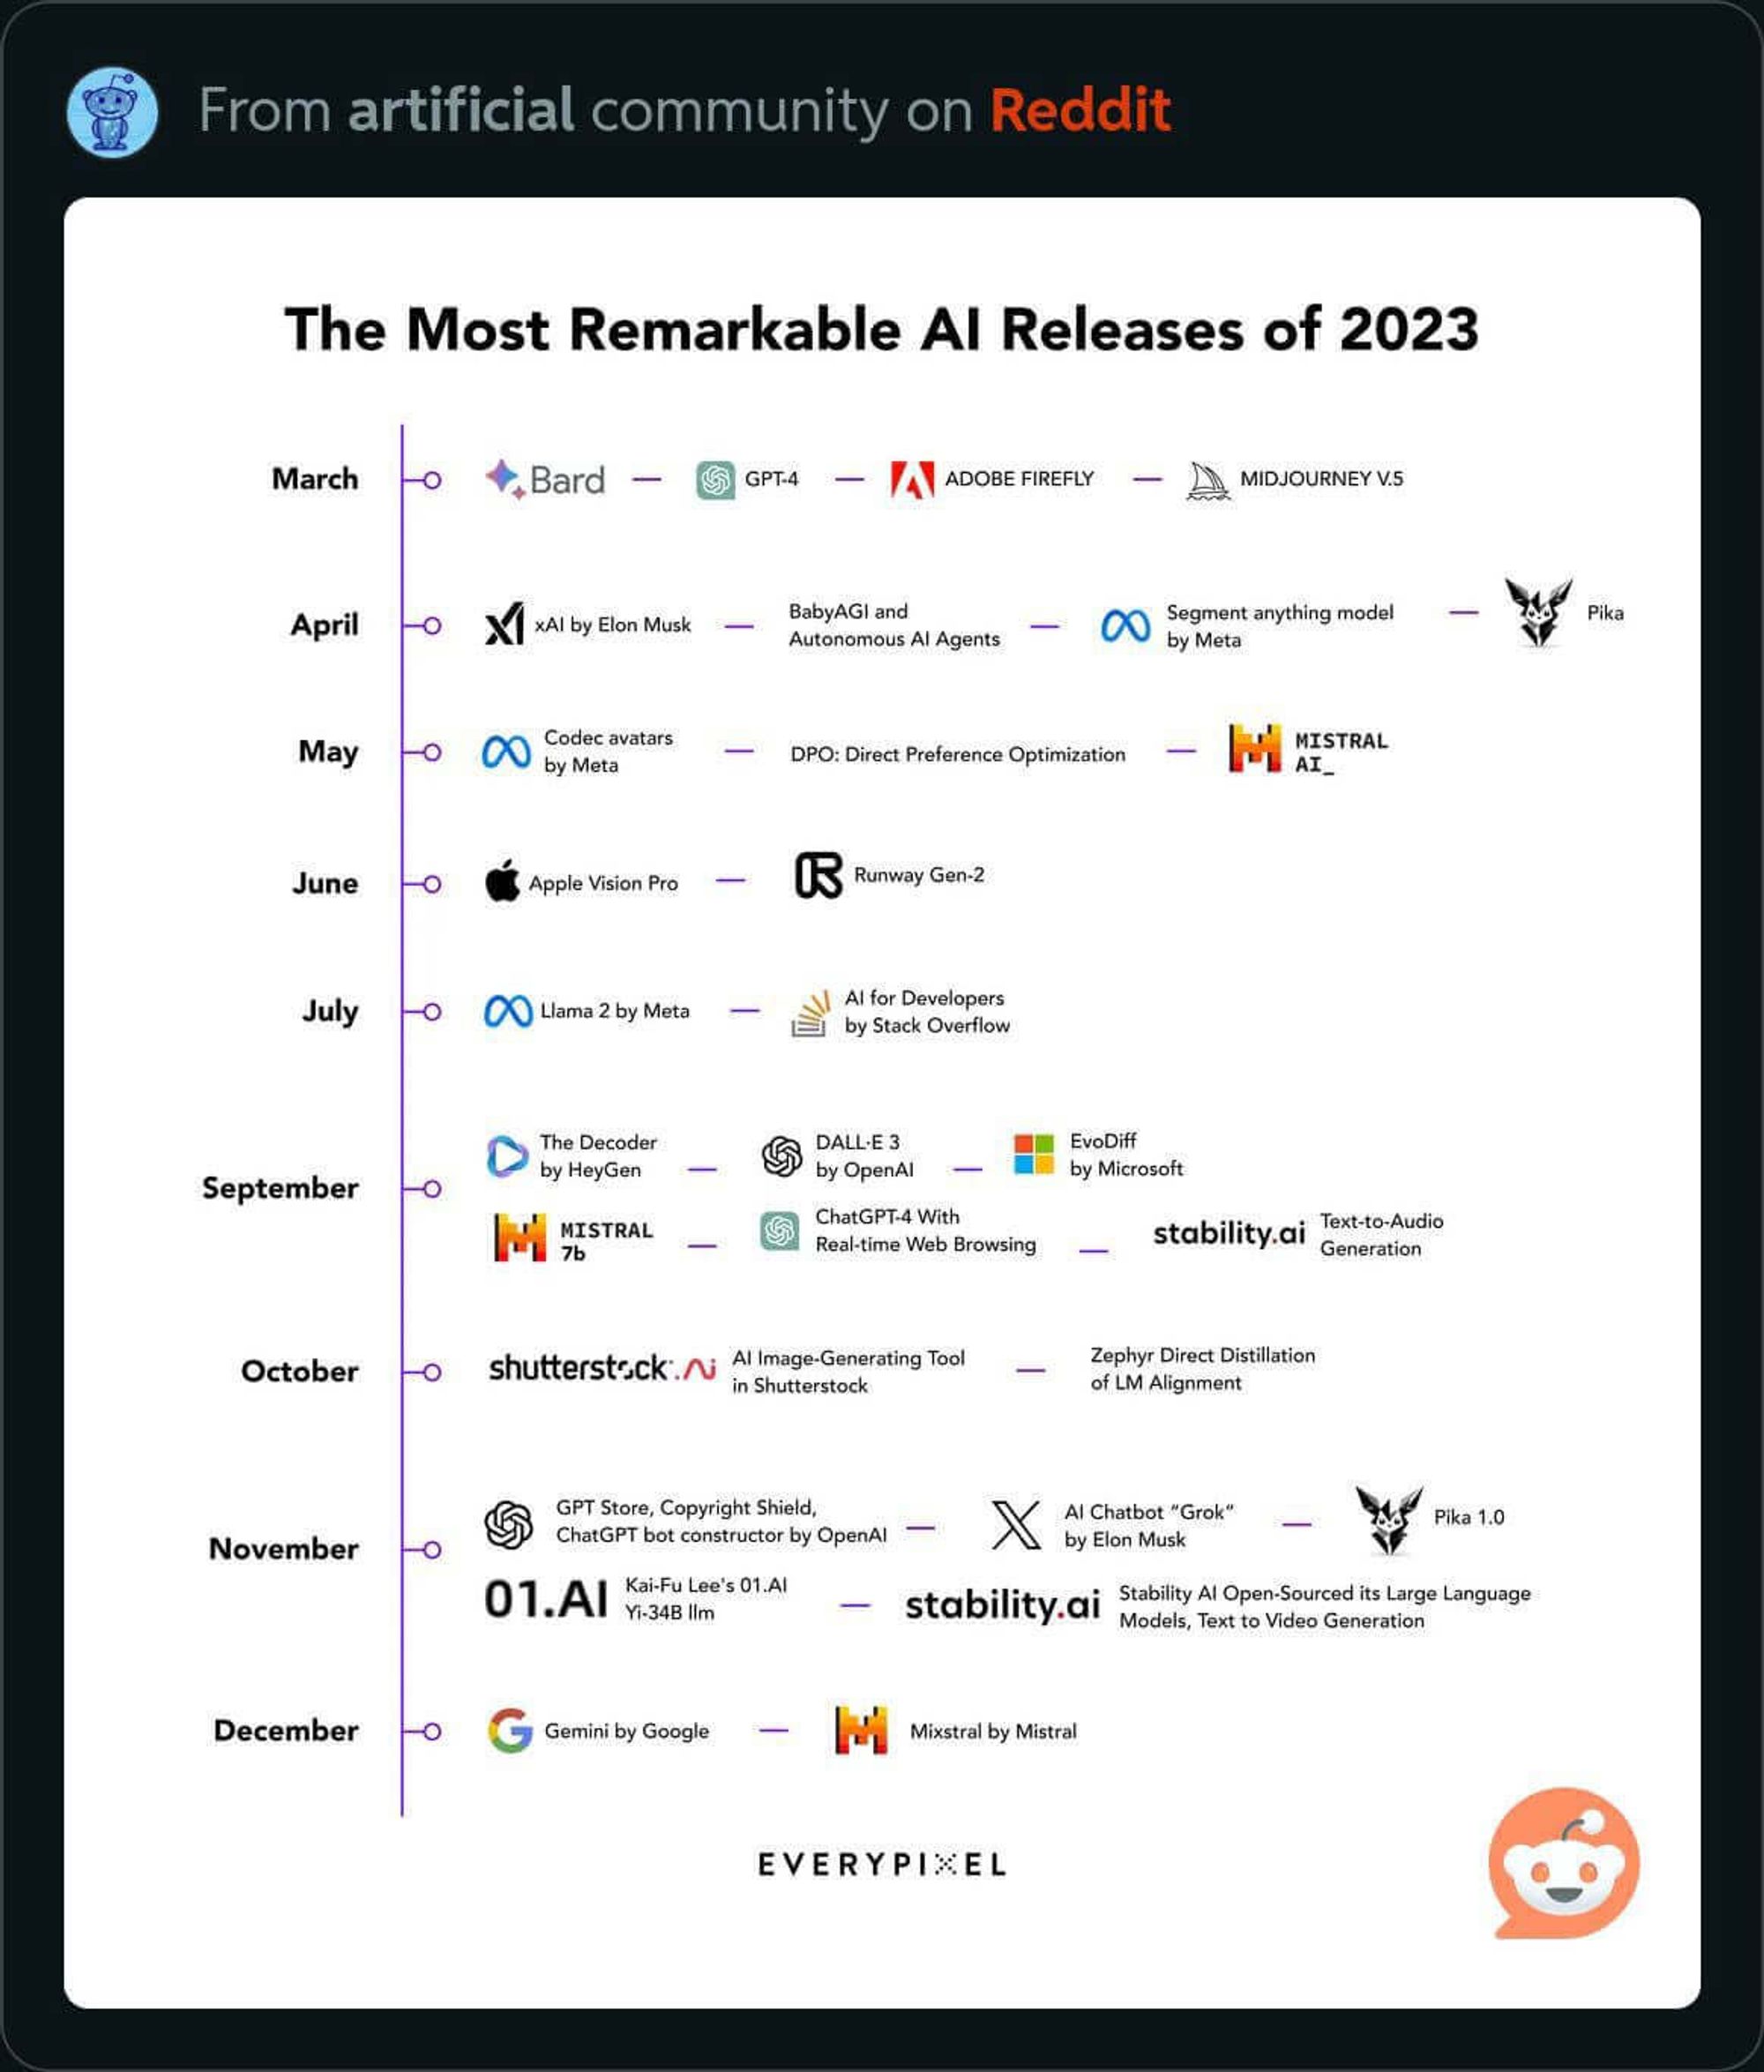 The Most Remarkable AI Releases of 2023